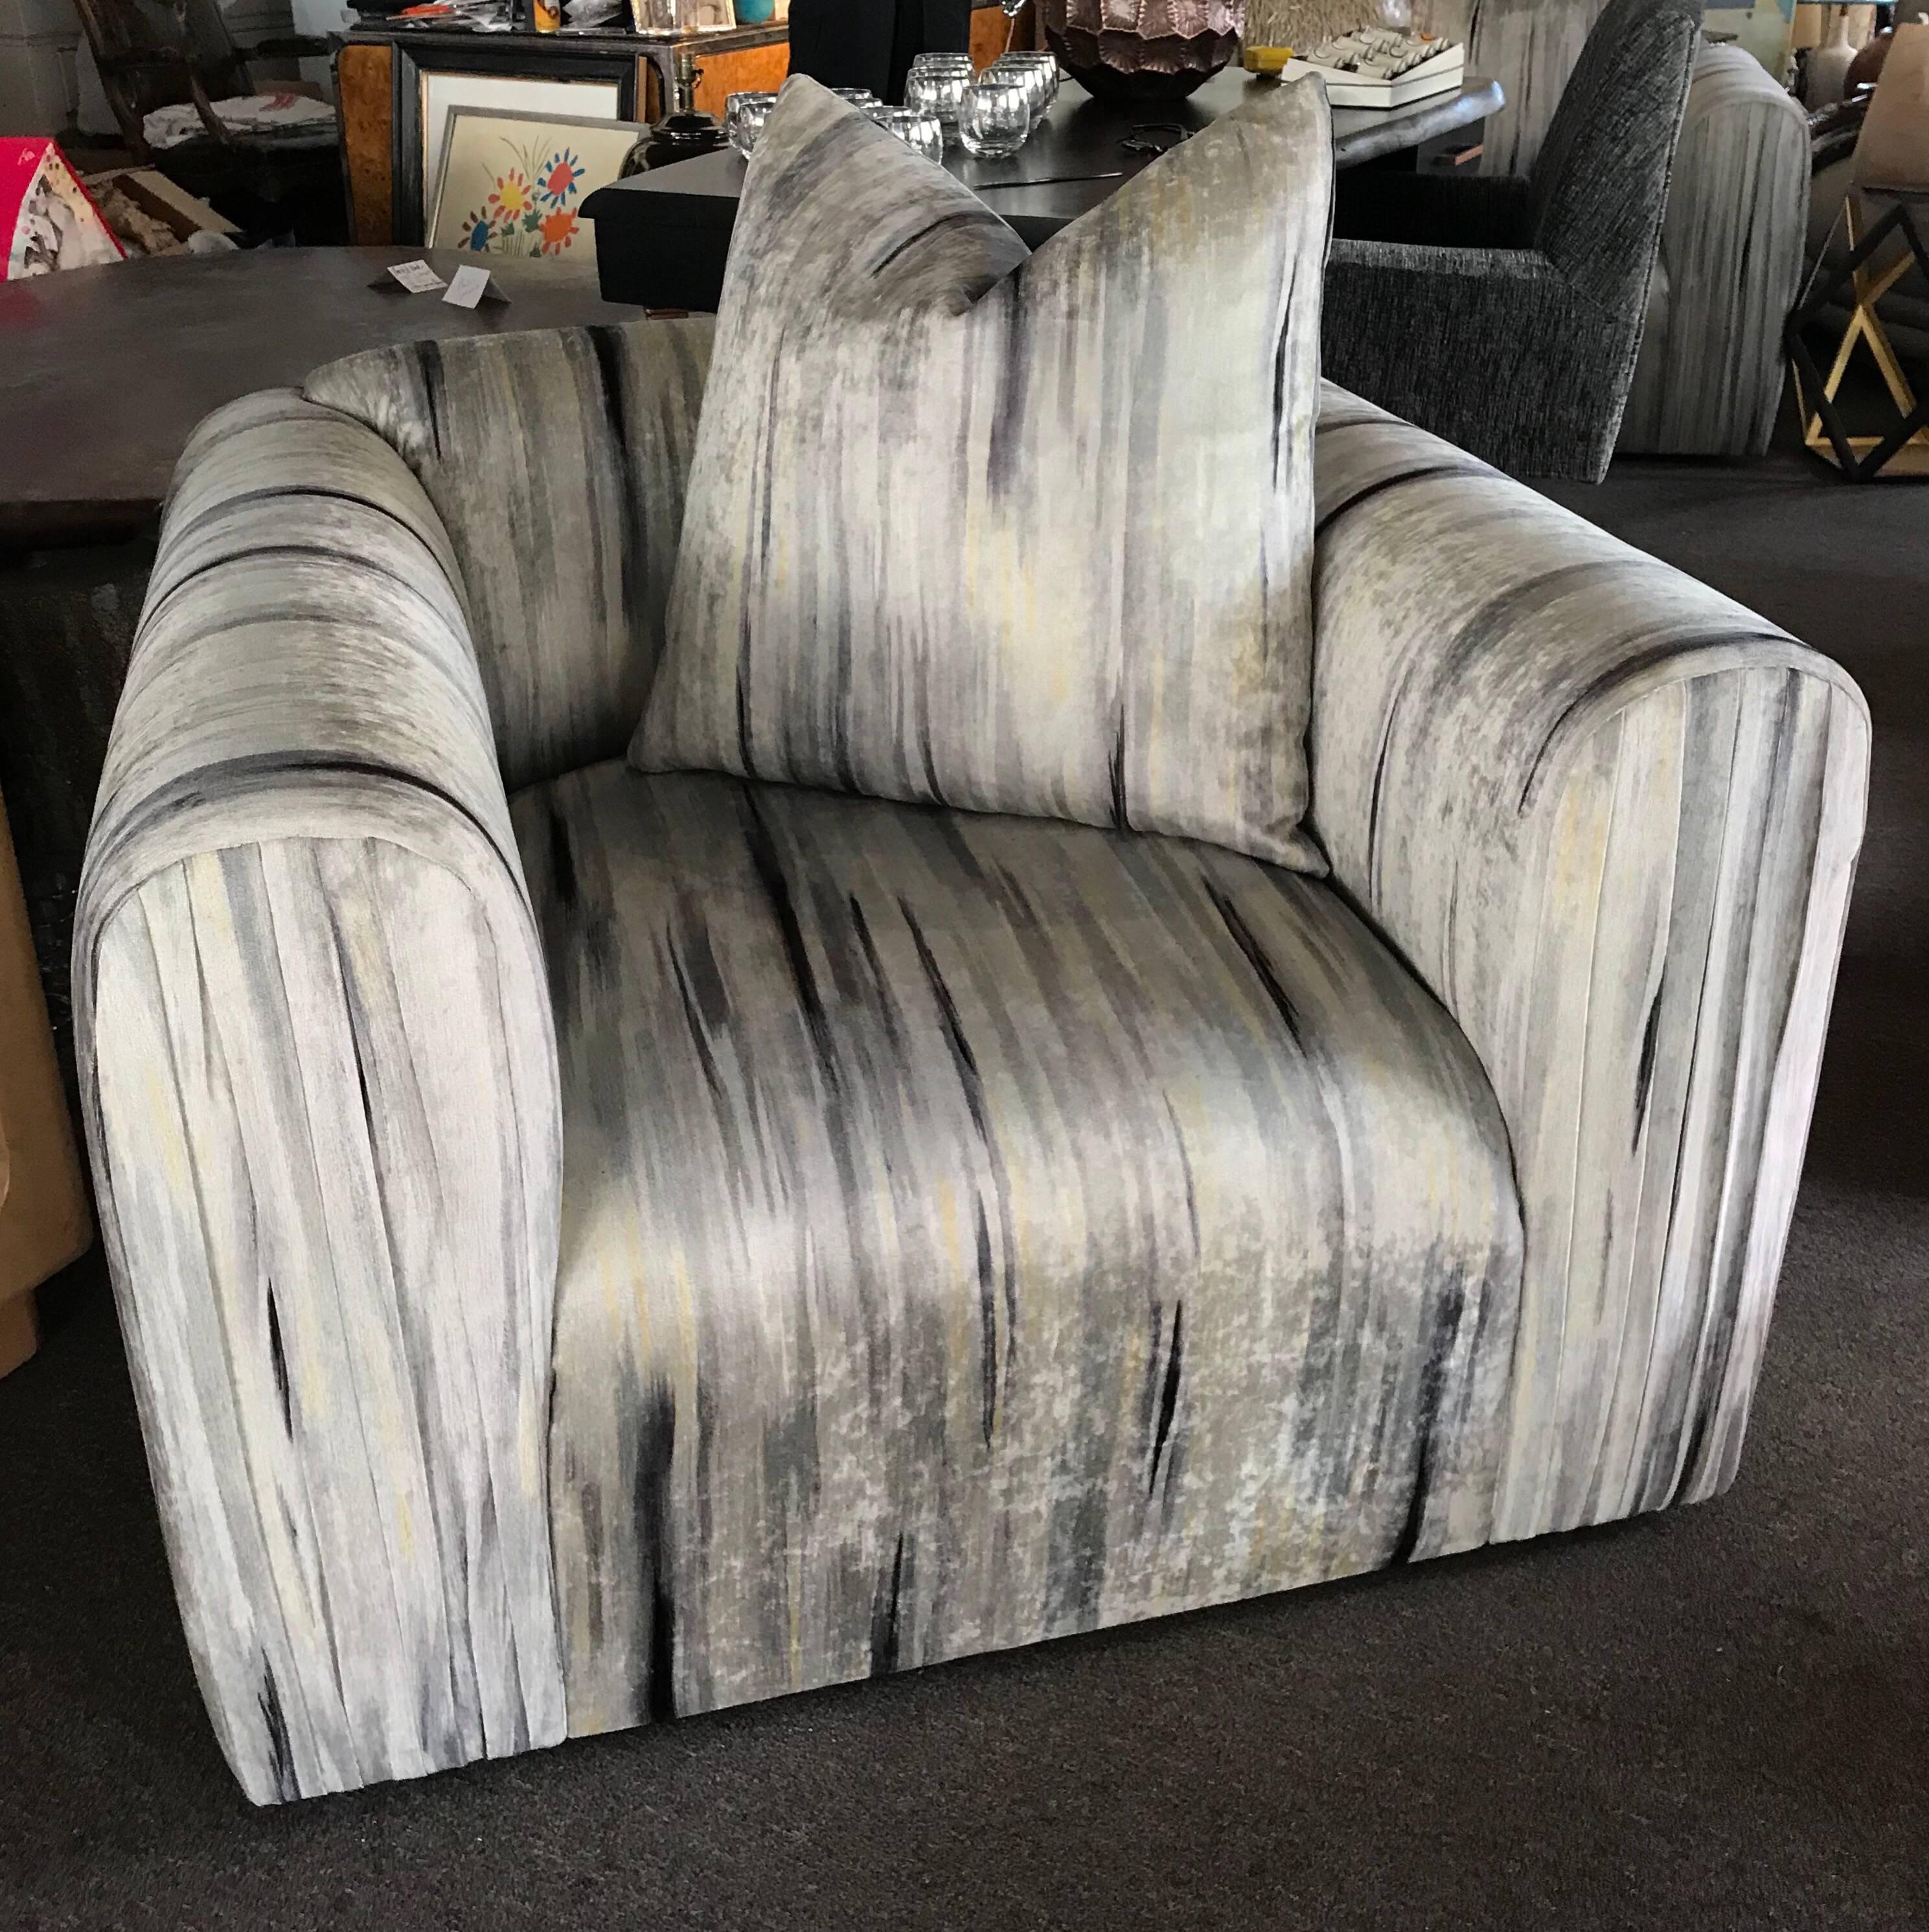 These chairs are newly upholstered in a very high end modern velvet that looks like it was painted in a modern art abstract watercolor. The chairs came from a very upscale Palm Springs Estate. Large and comfortable, the styling of the draped front